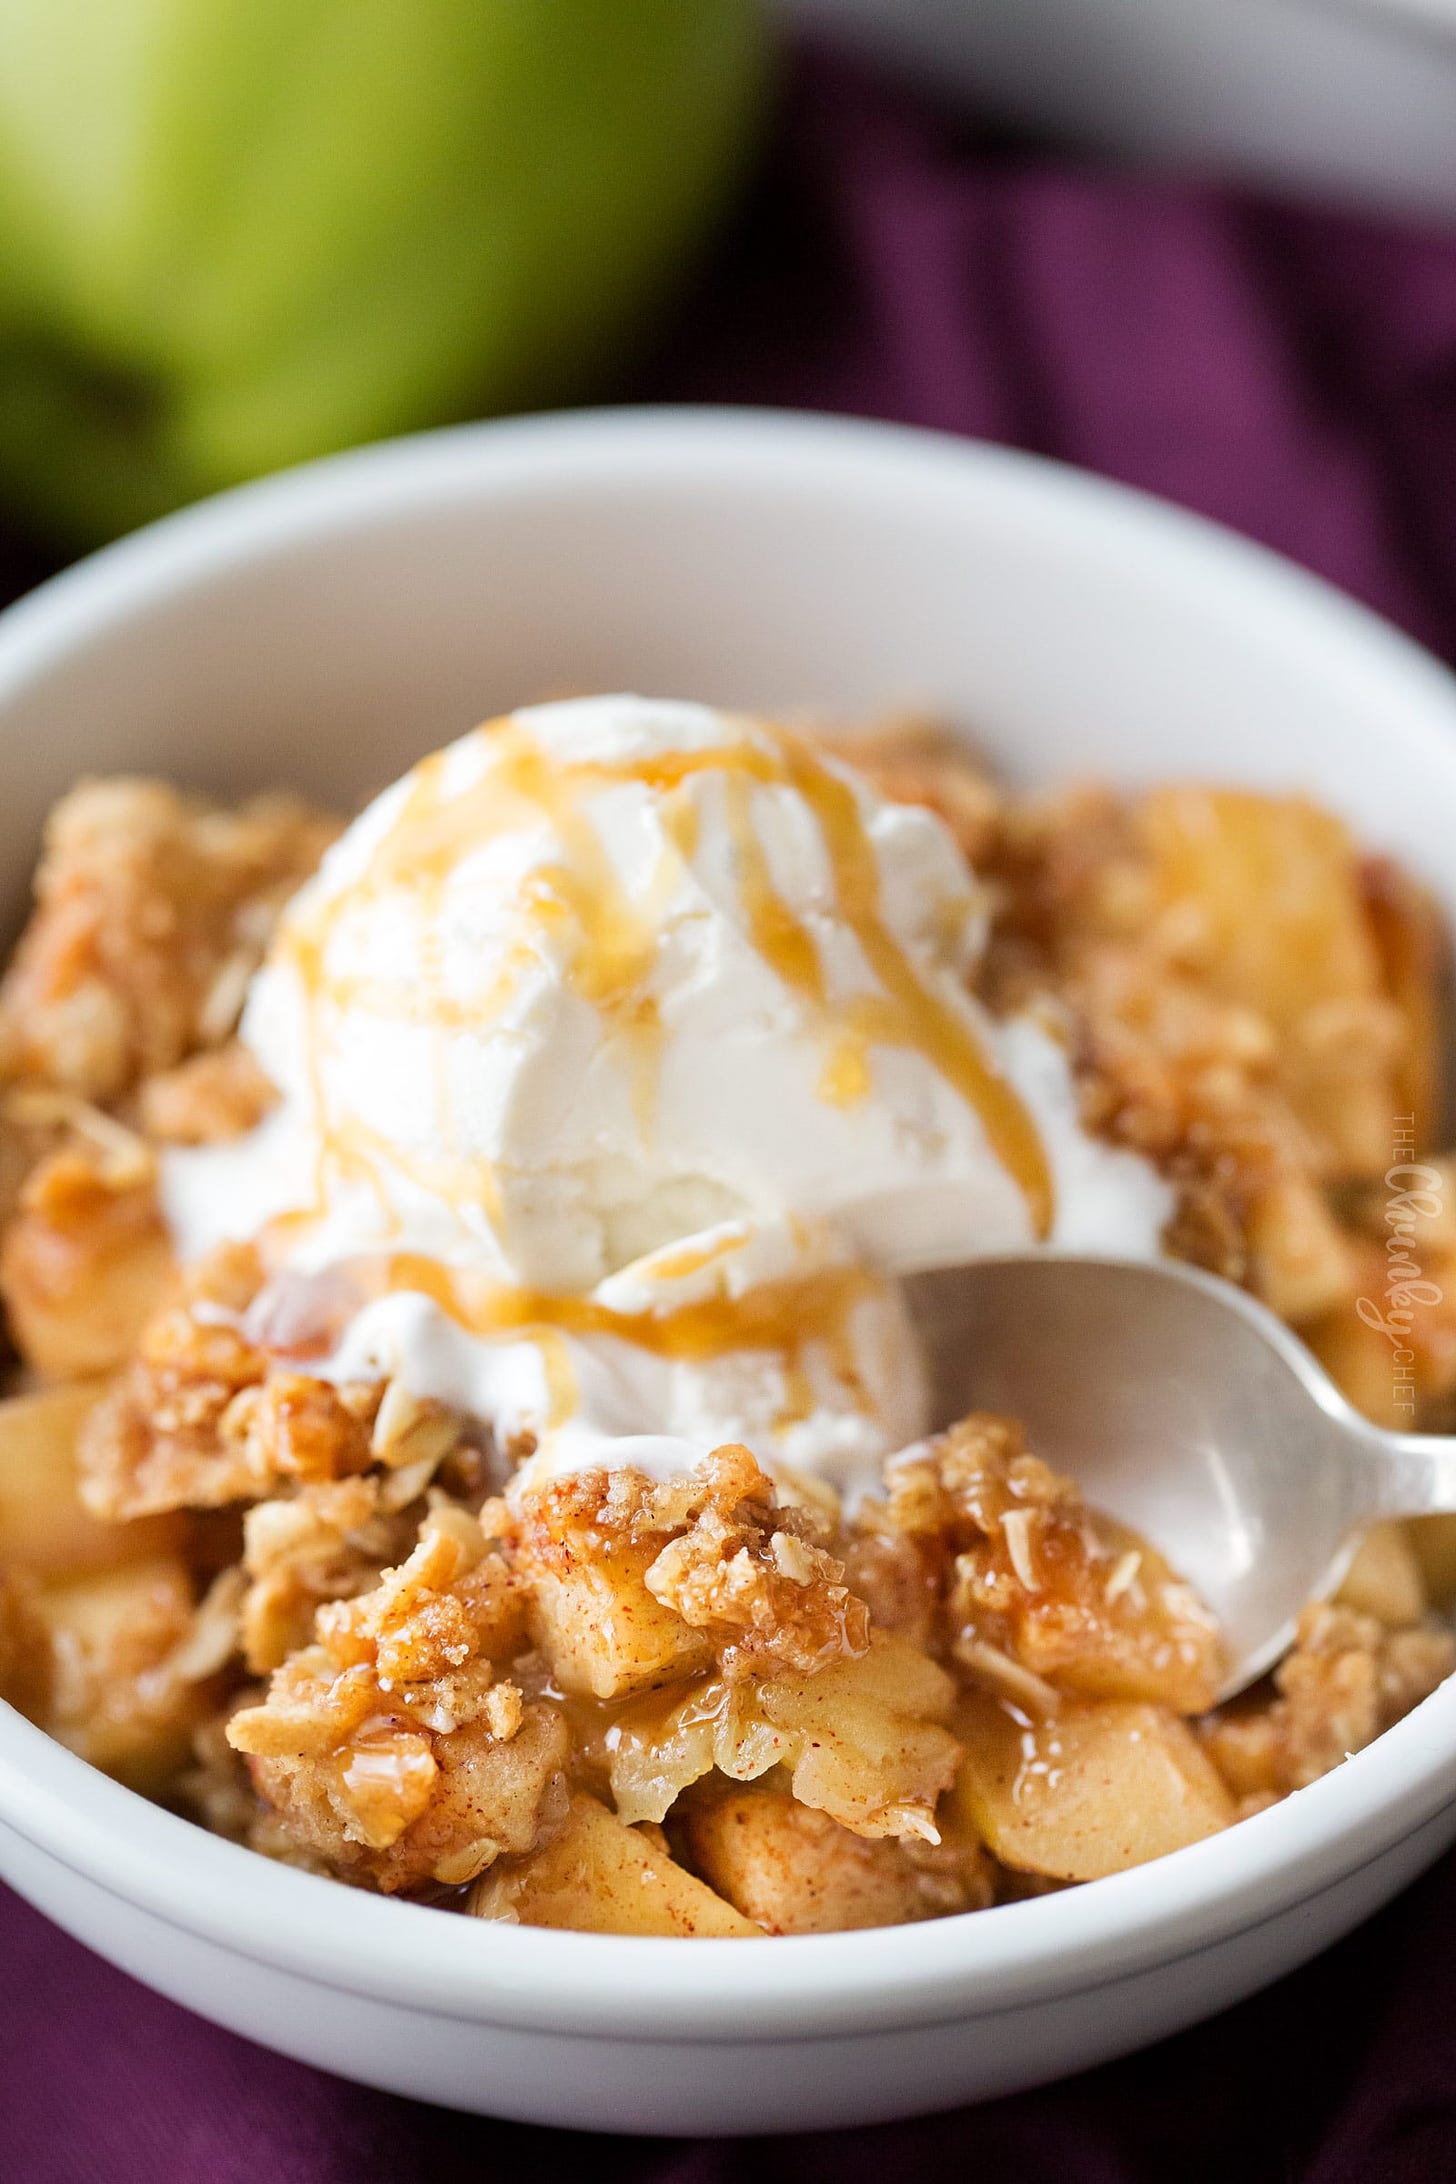 Apple crisp in a bowl with scoop of vanilla ice cream and caramel sauce, with a spoon taking a scoop